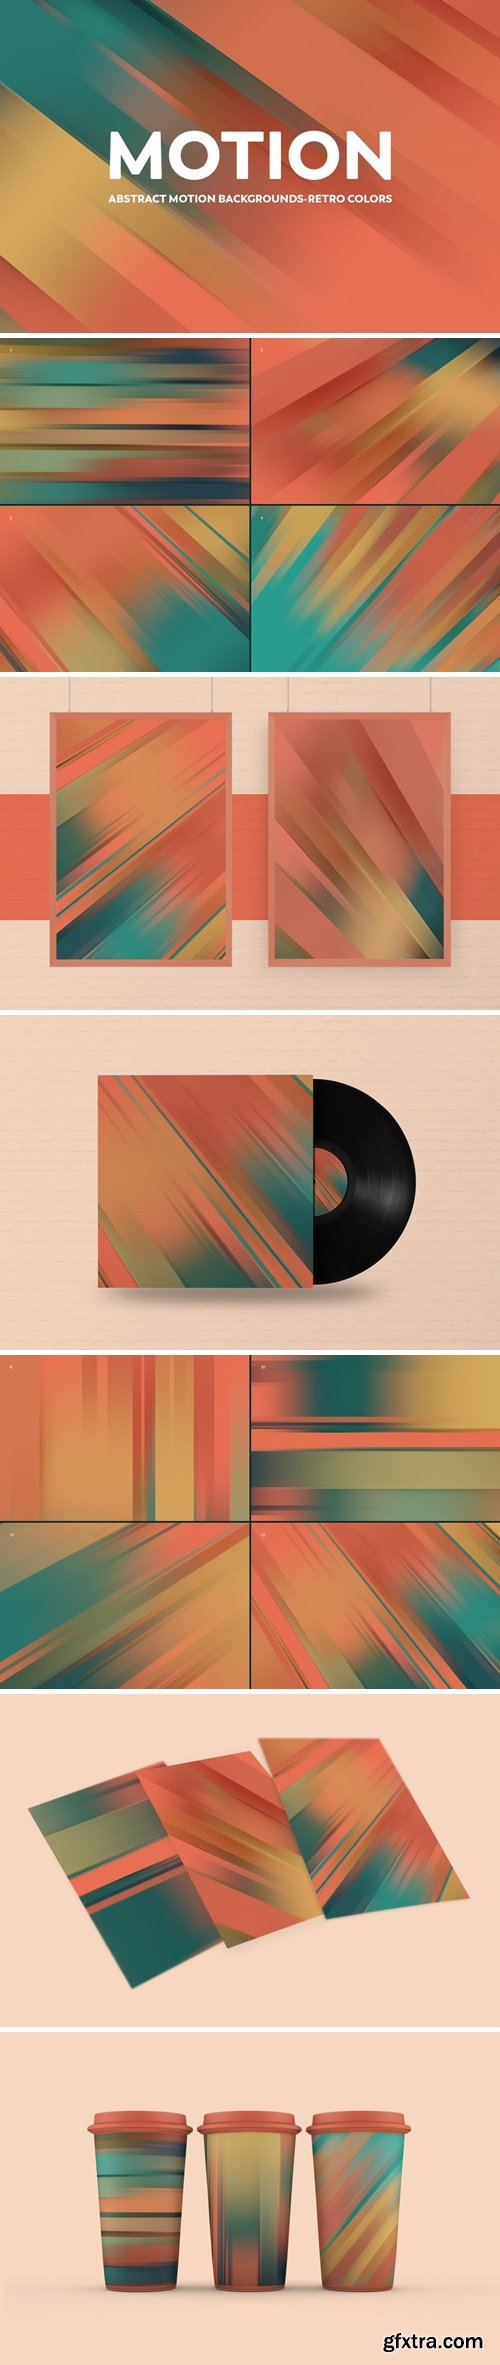 Abstract Motion Backgrounds-Retro Colors D4SM96L